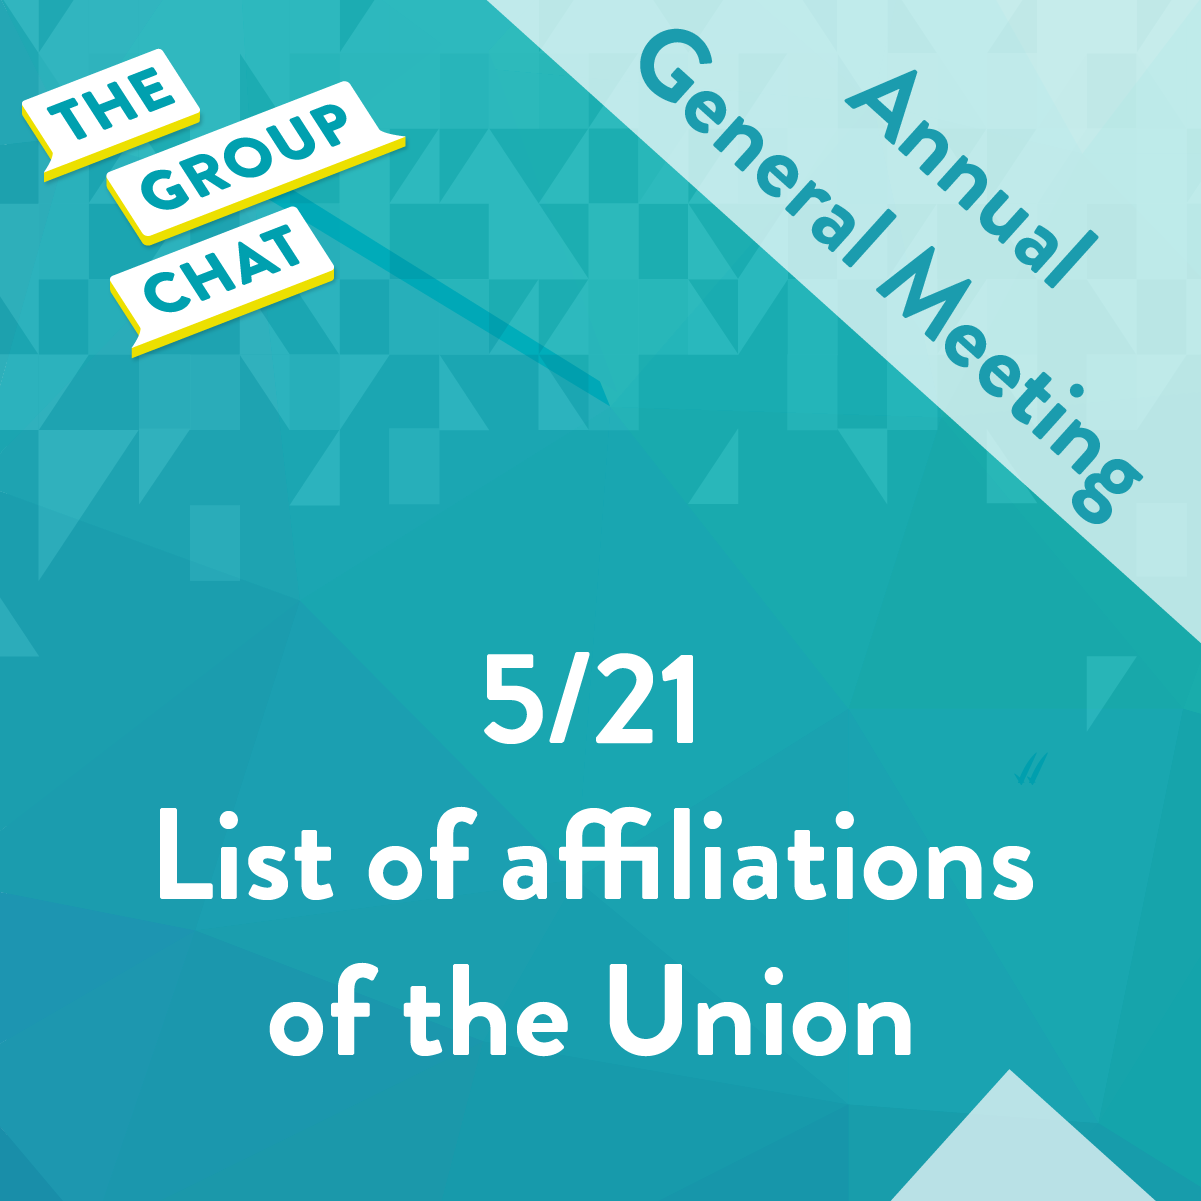 5/21 List of affiliations of the Union